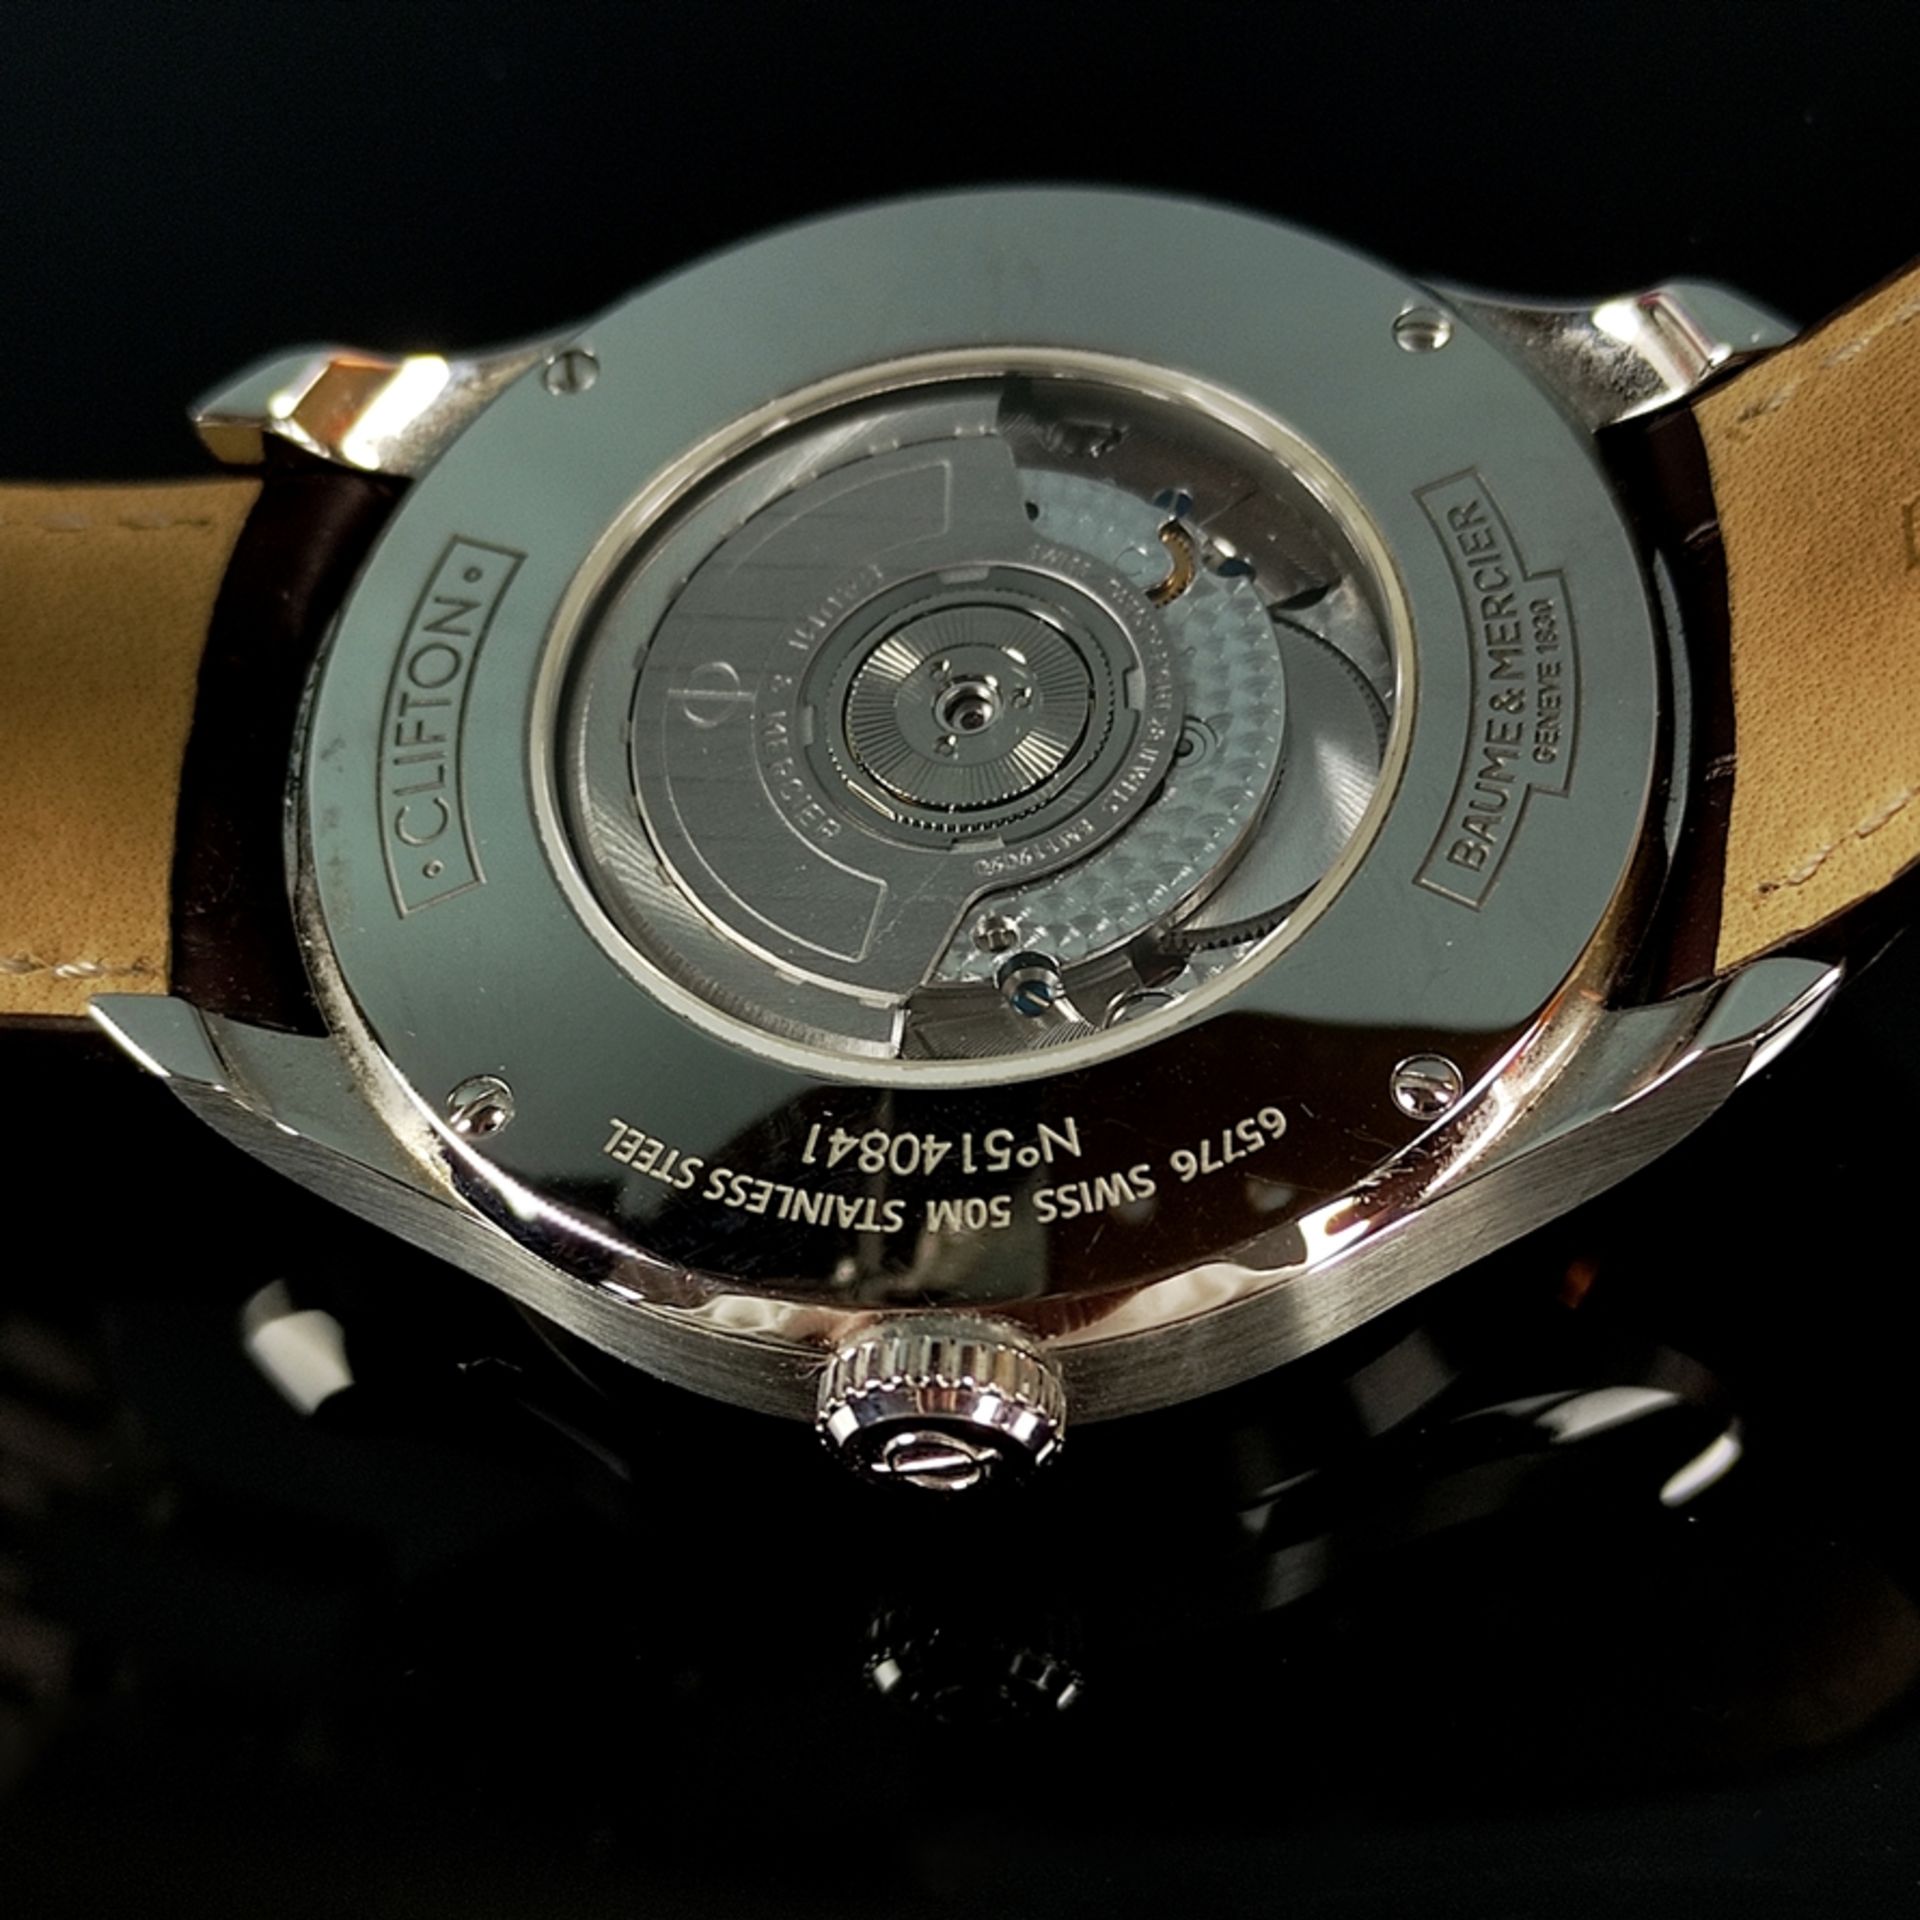 Wristwatch, Baume & Mercier, Clifton 10205, automatic with power reserve up to 42 hours, elegant th - Image 3 of 4